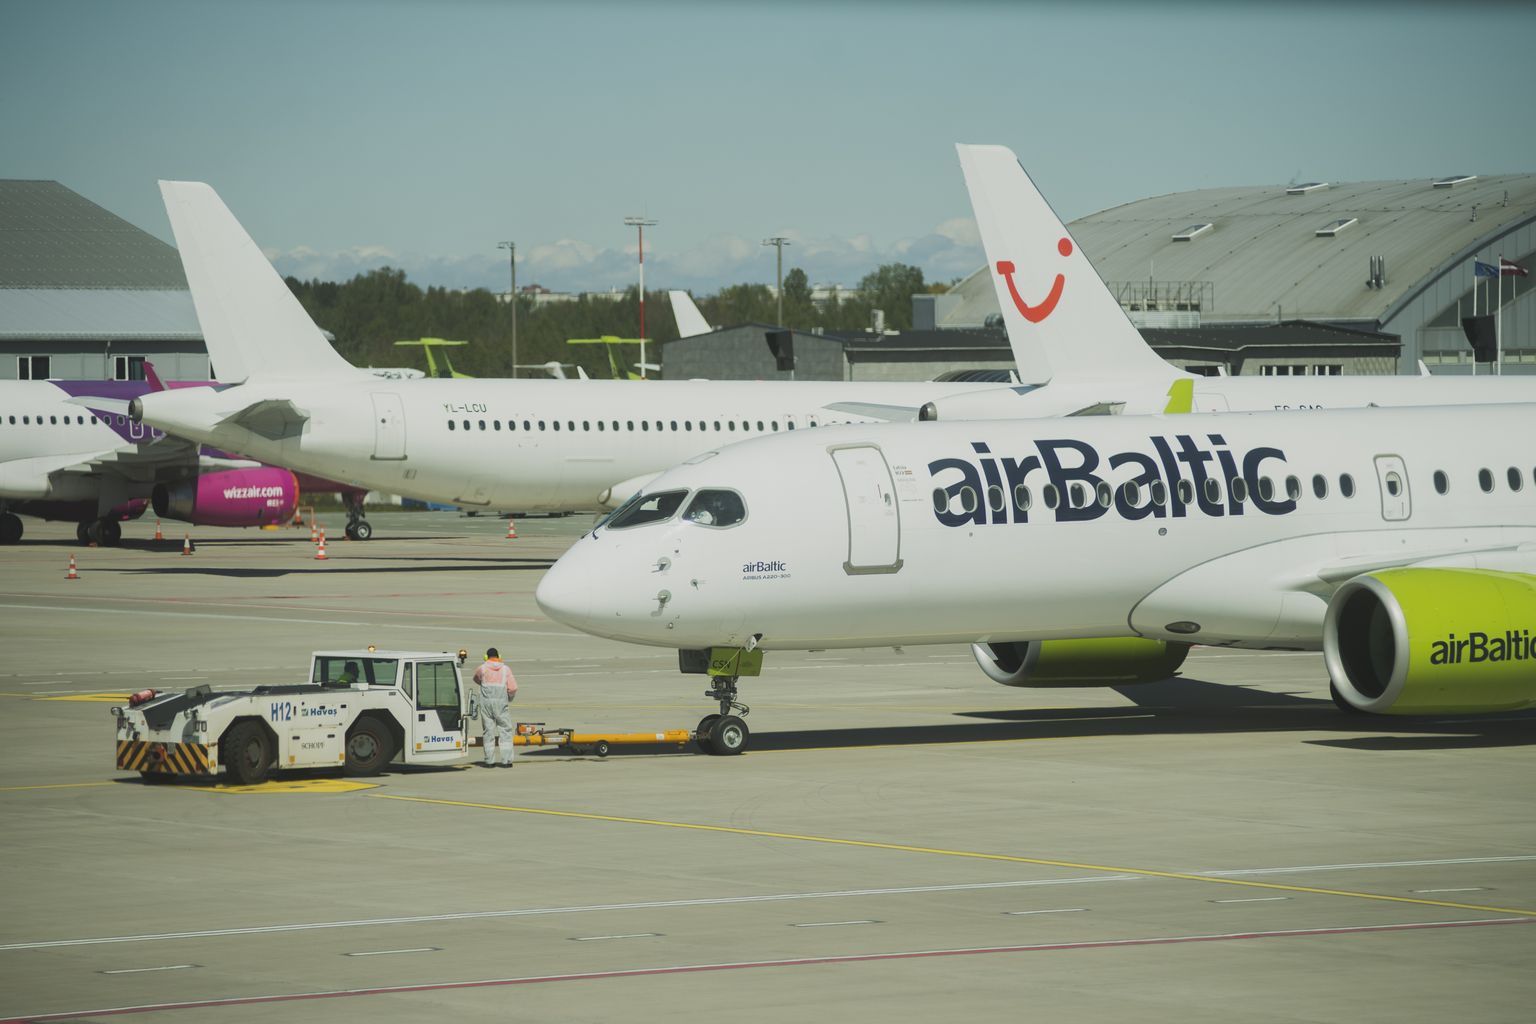 "airBaltic".